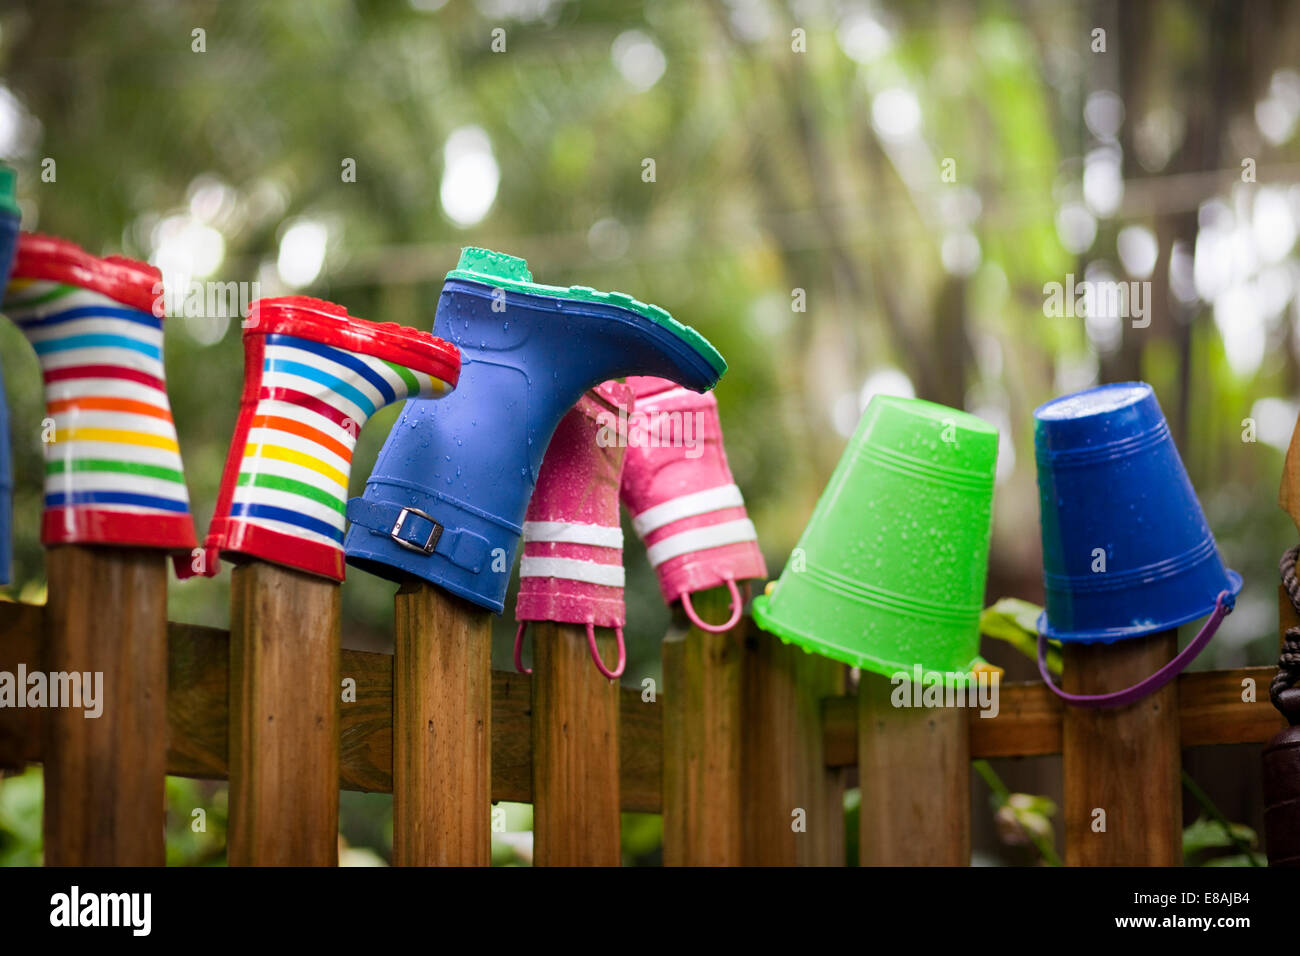 Row of rubber boots and buckets on top of garden fence Stock Photo